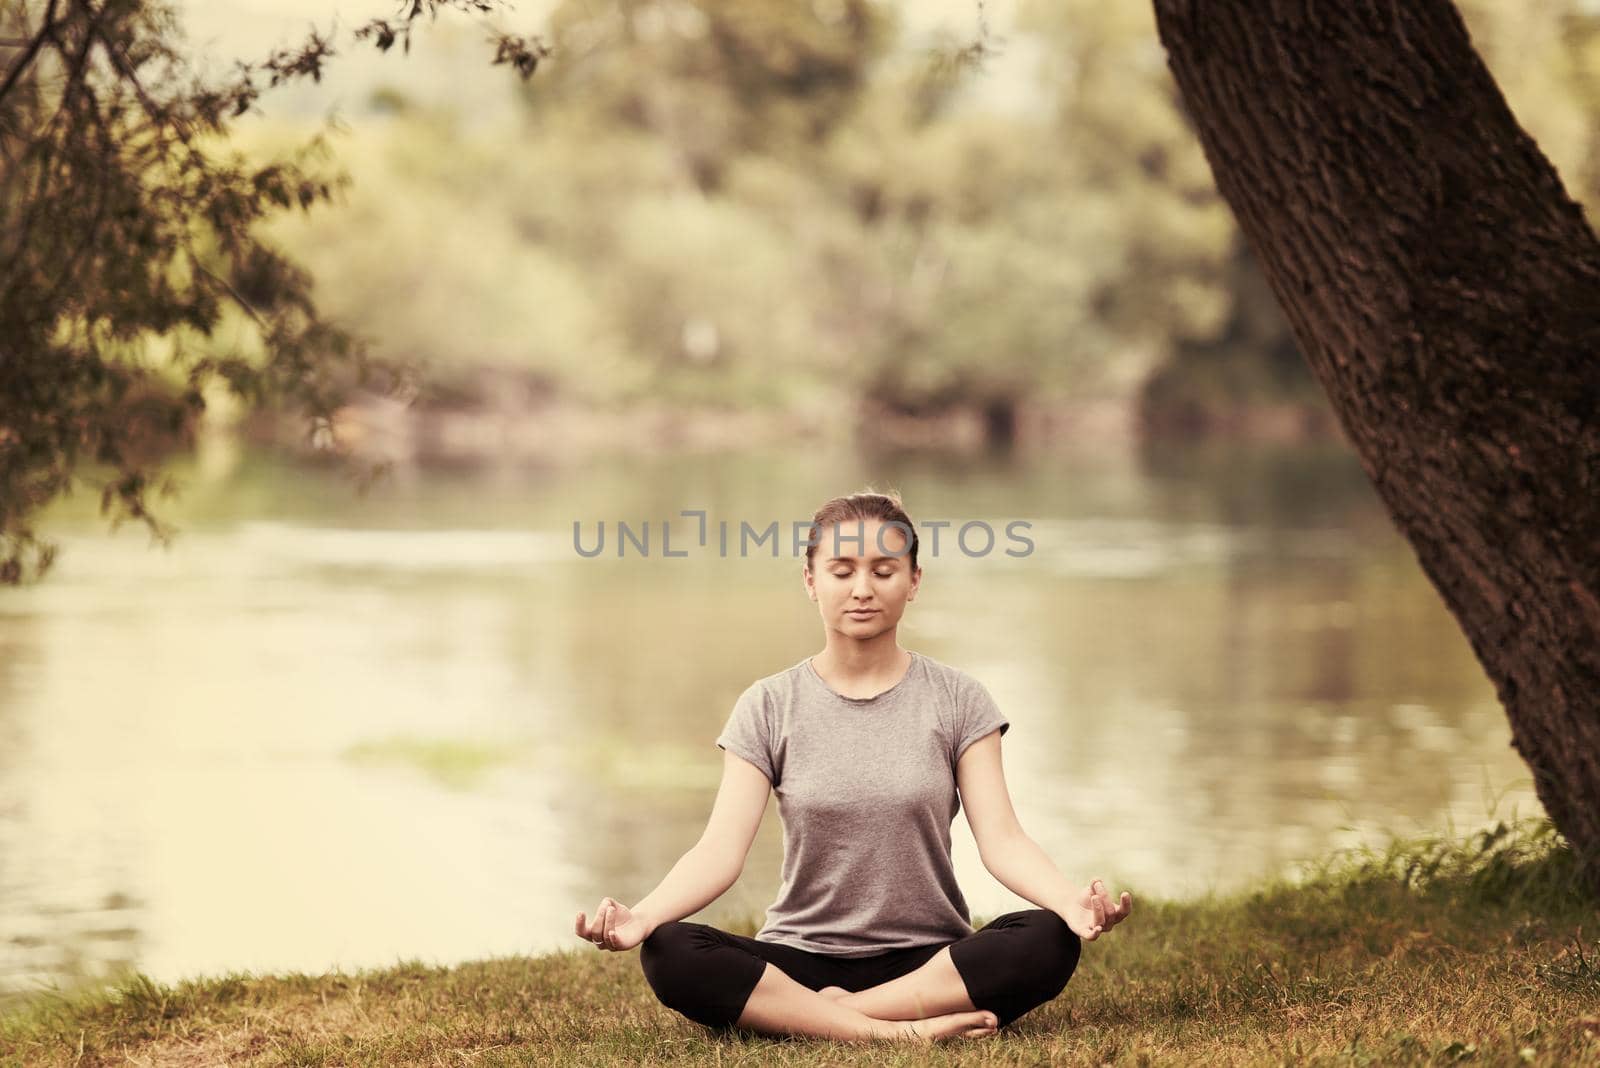 healthy woman relaxing while meditating and doing yoga exercise in the beautiful nature on the bank of the river